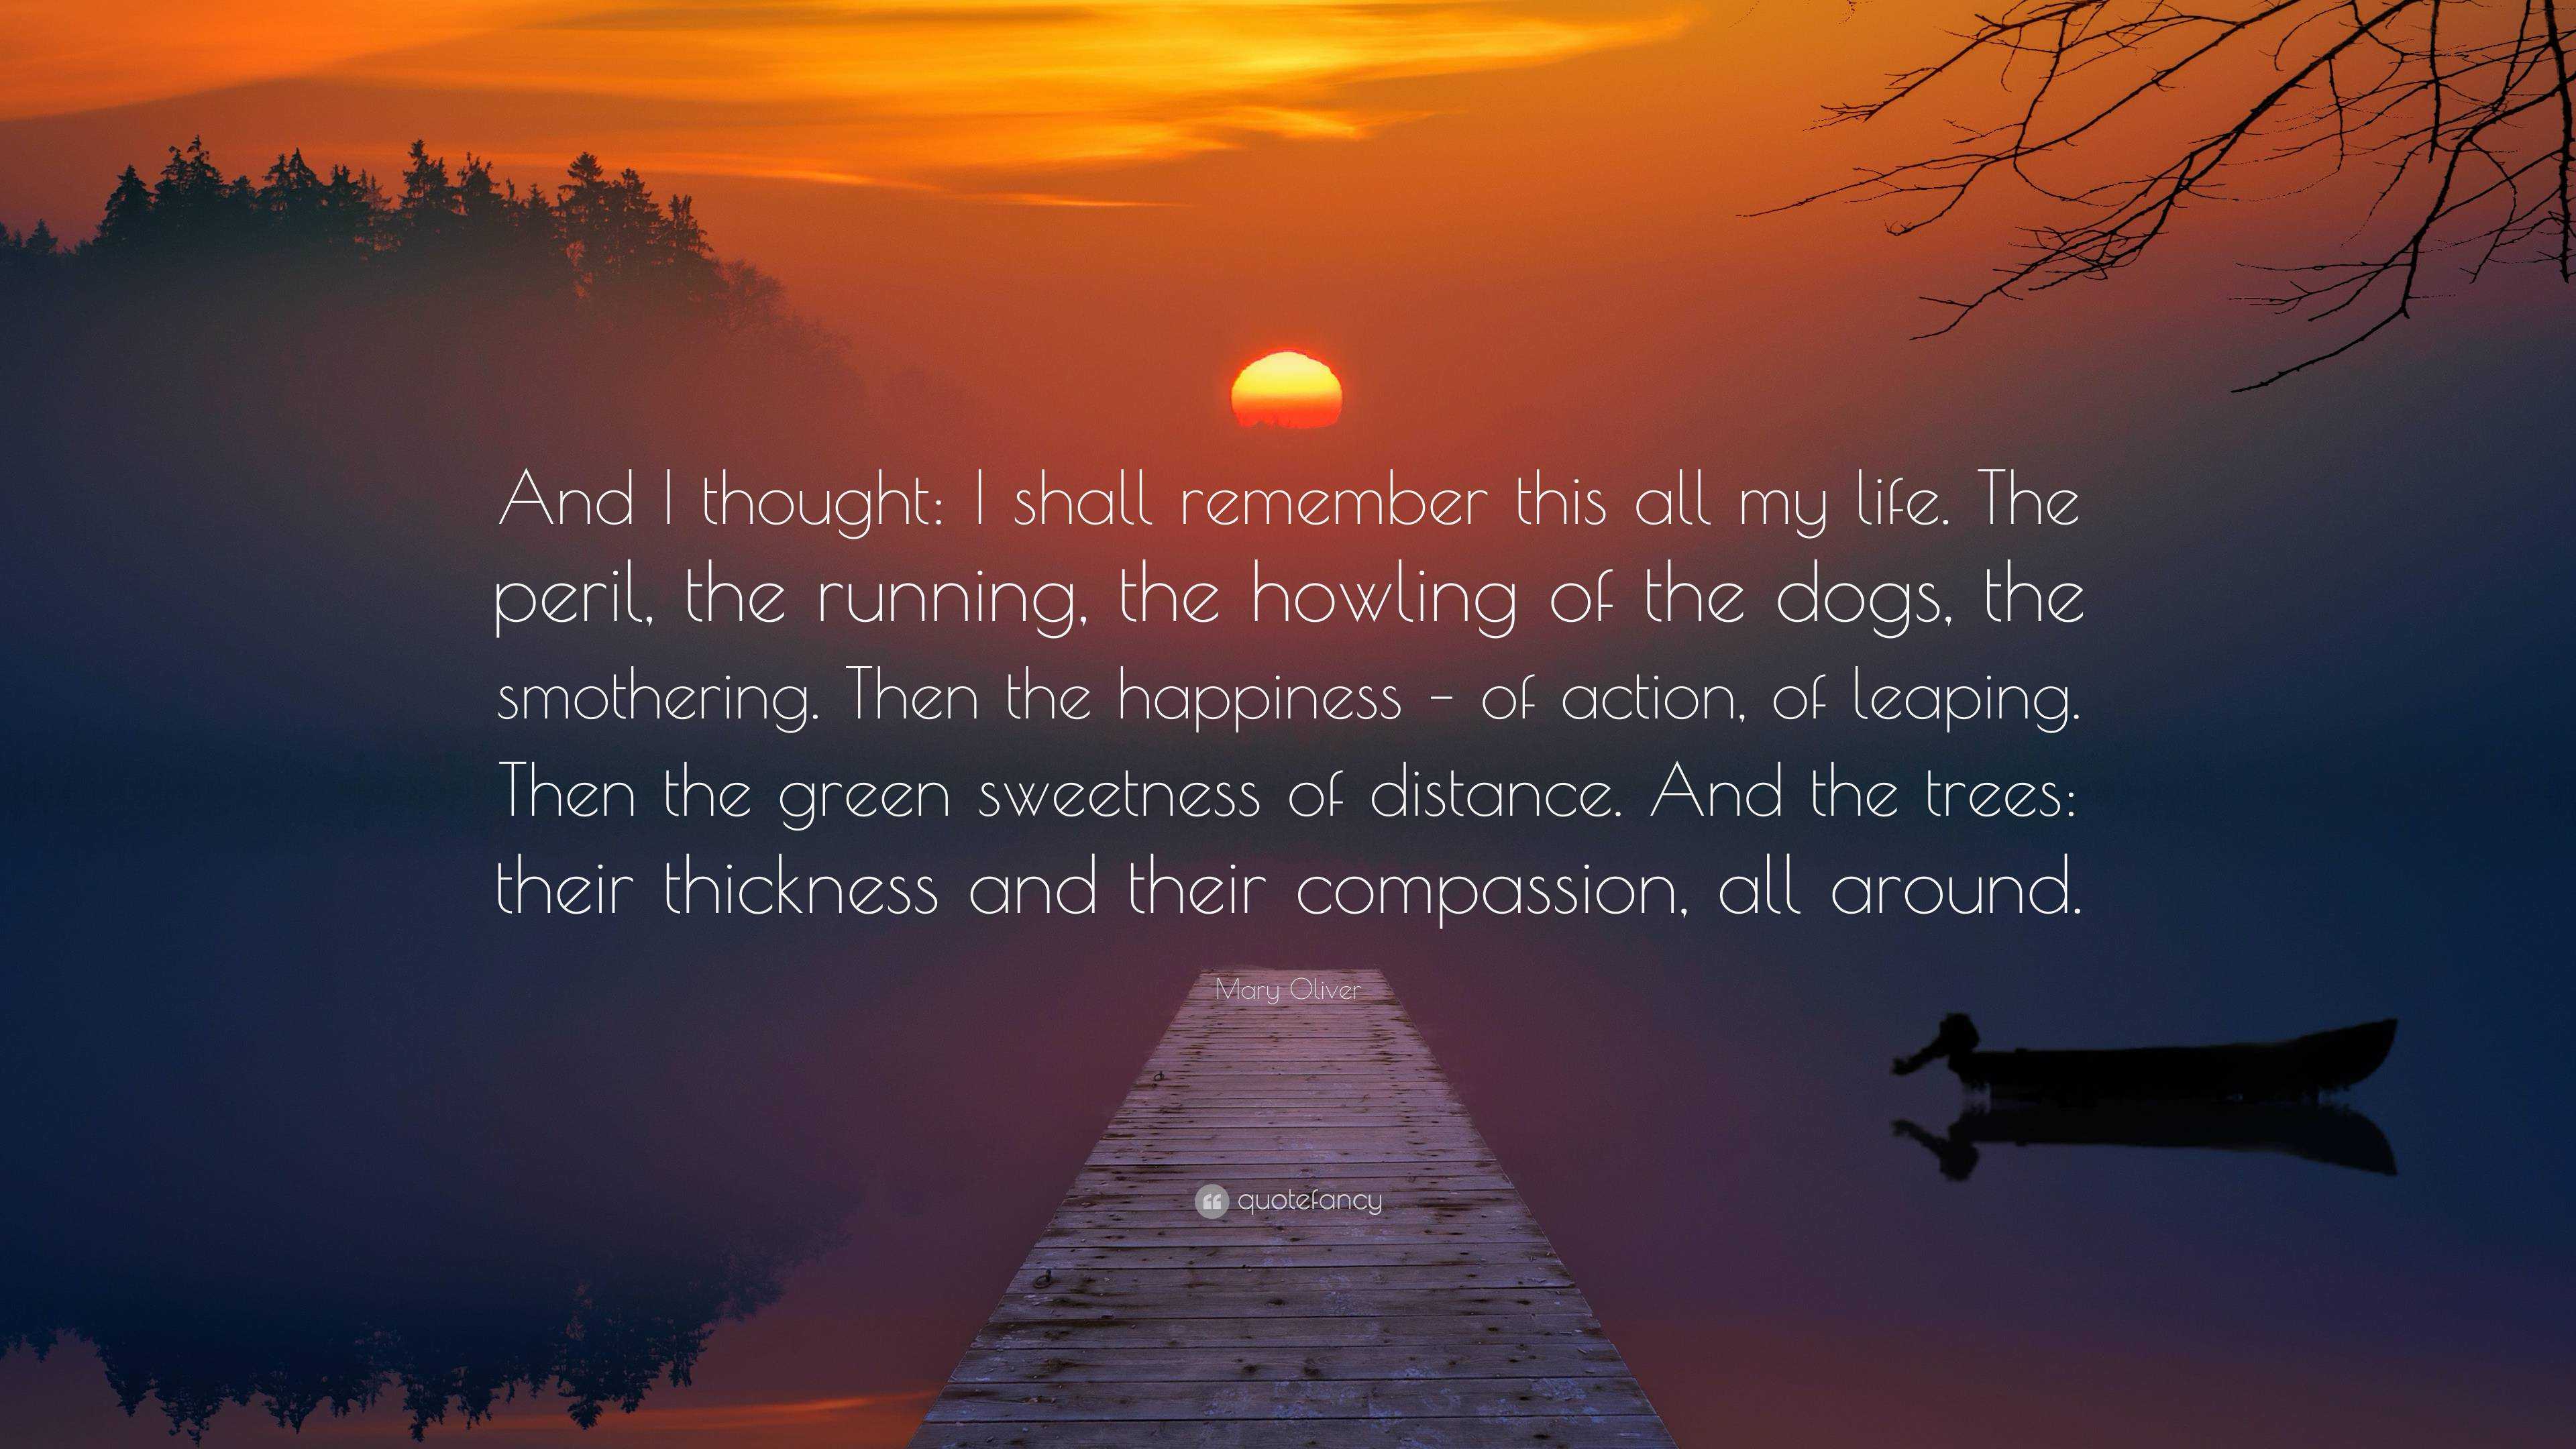 Mary Oliver Quote: “And I thought: I shall remember this all my life ...